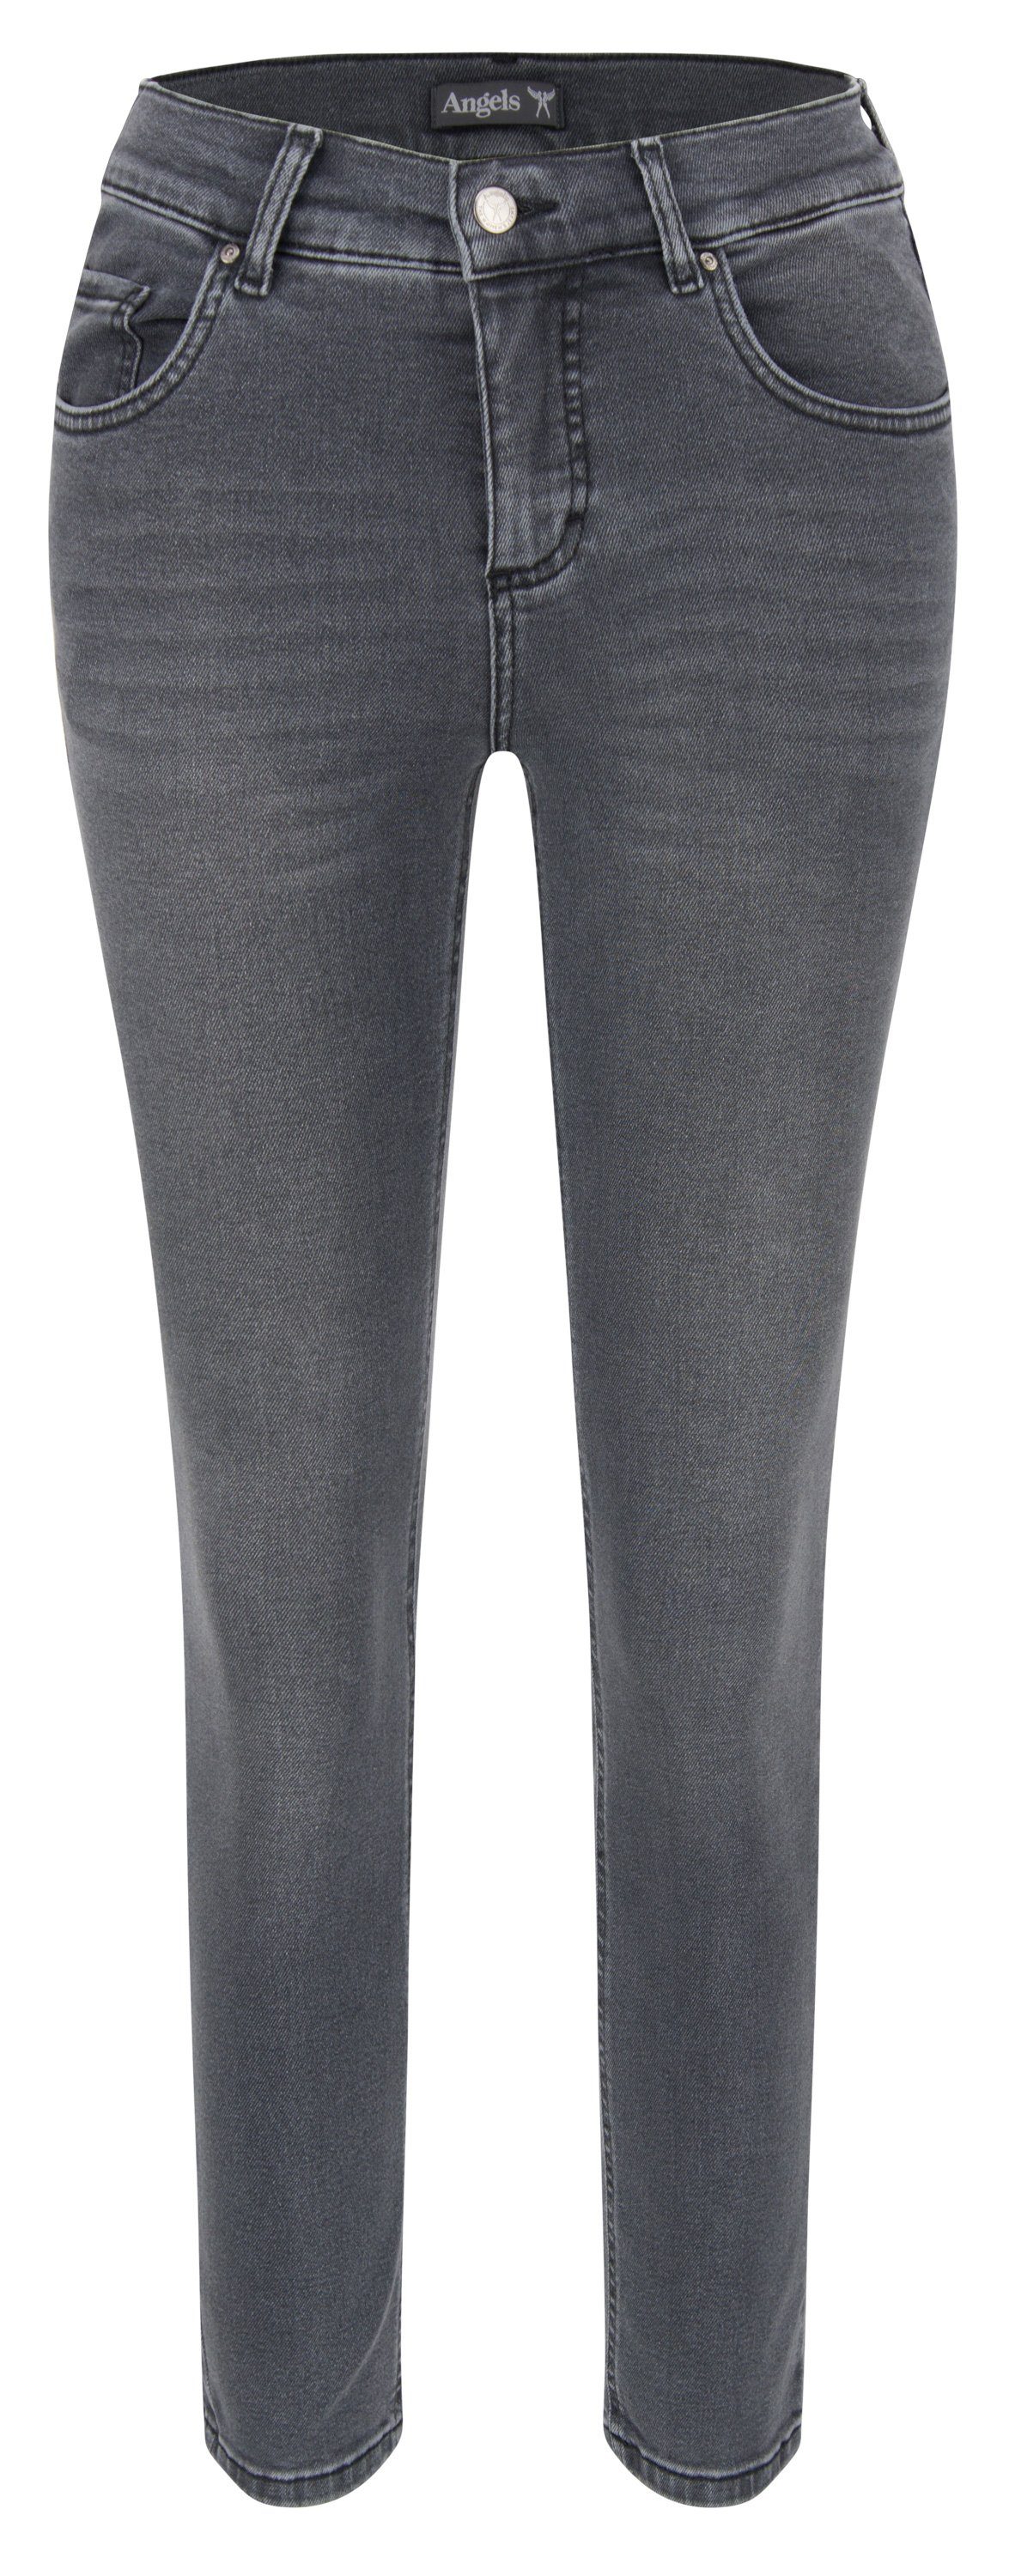 grey Stretch-Jeans STRETCH ANGELS ANGELS used 325 - SKINNY JEANS 12.1258